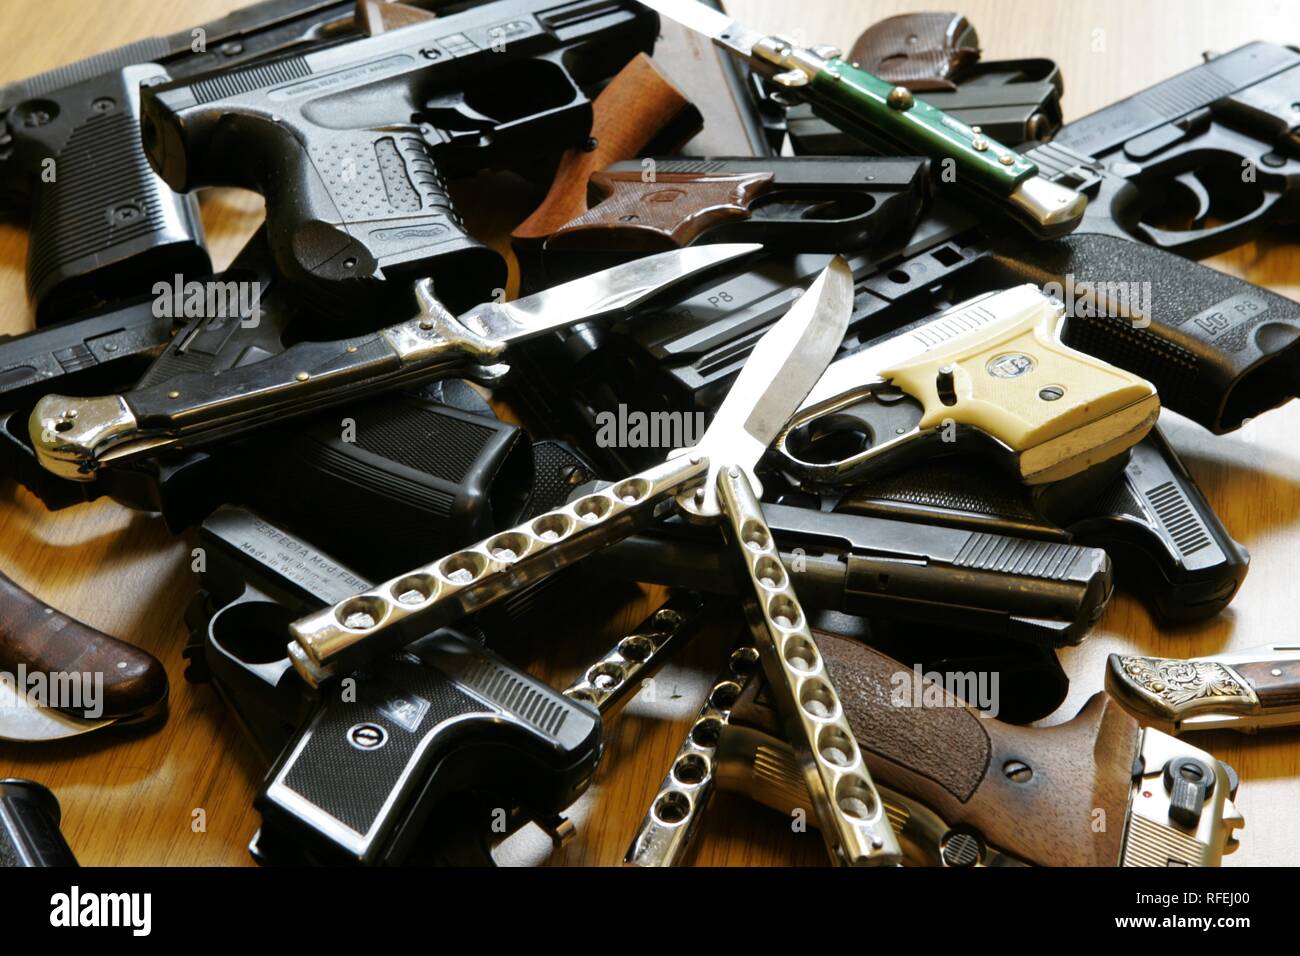 Germany : Illegal weapons, knifes, confiscated from young people Stock Photo